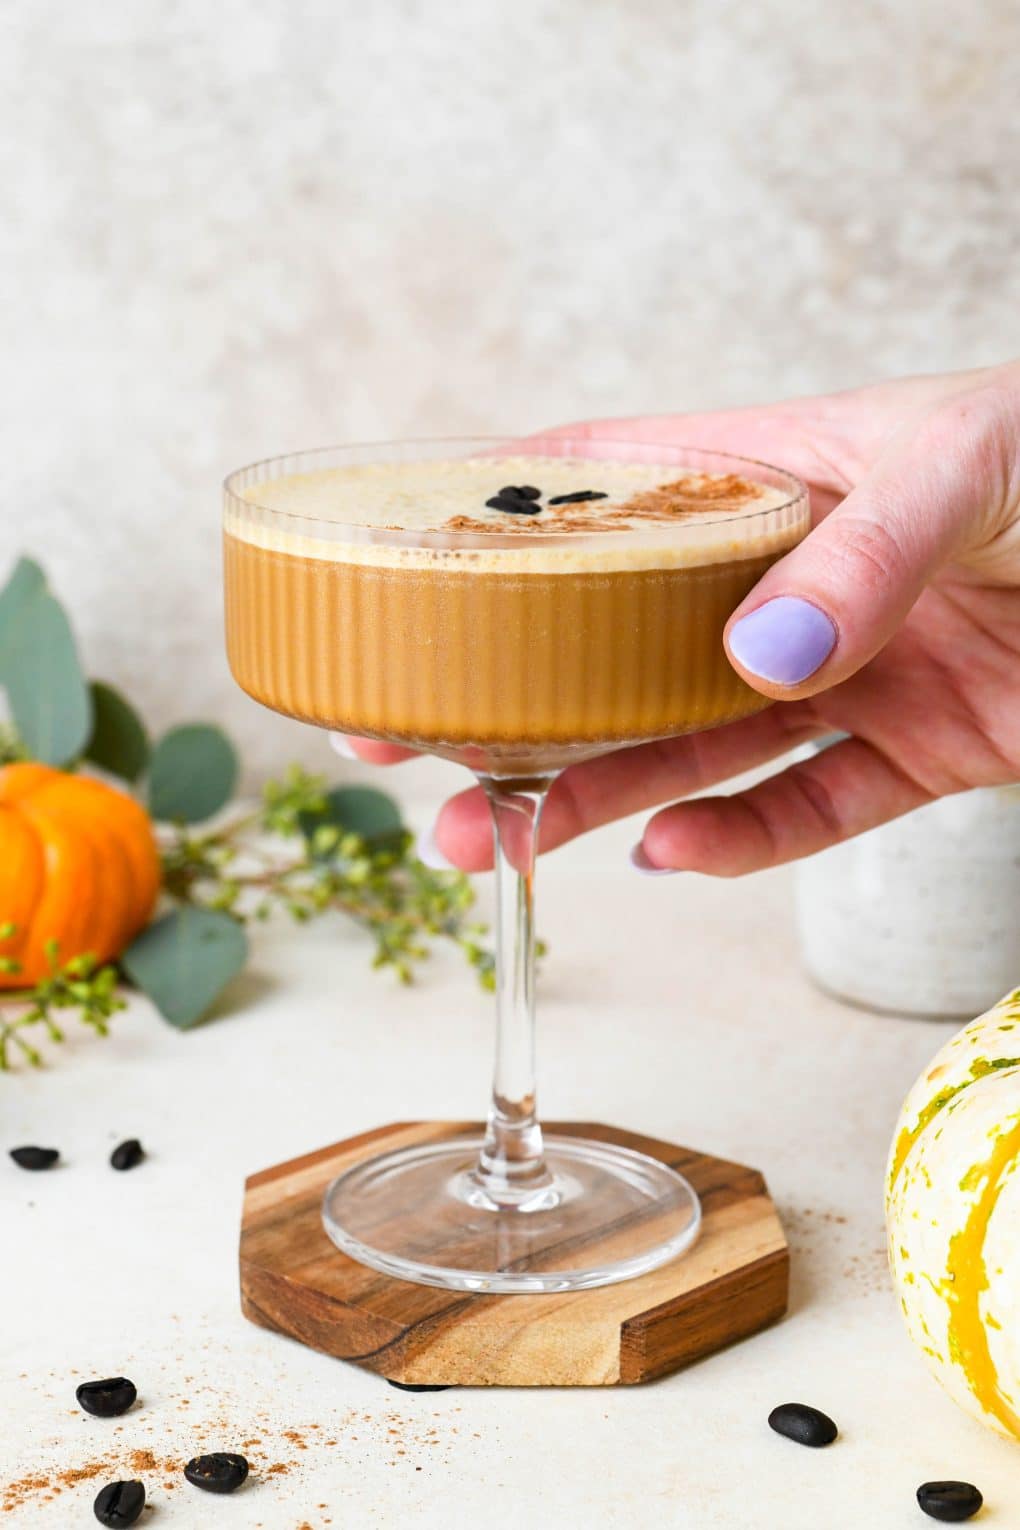 A pumpkin spice espresso martini on a coaster, with a hand reaching in to the image to pick it up. 